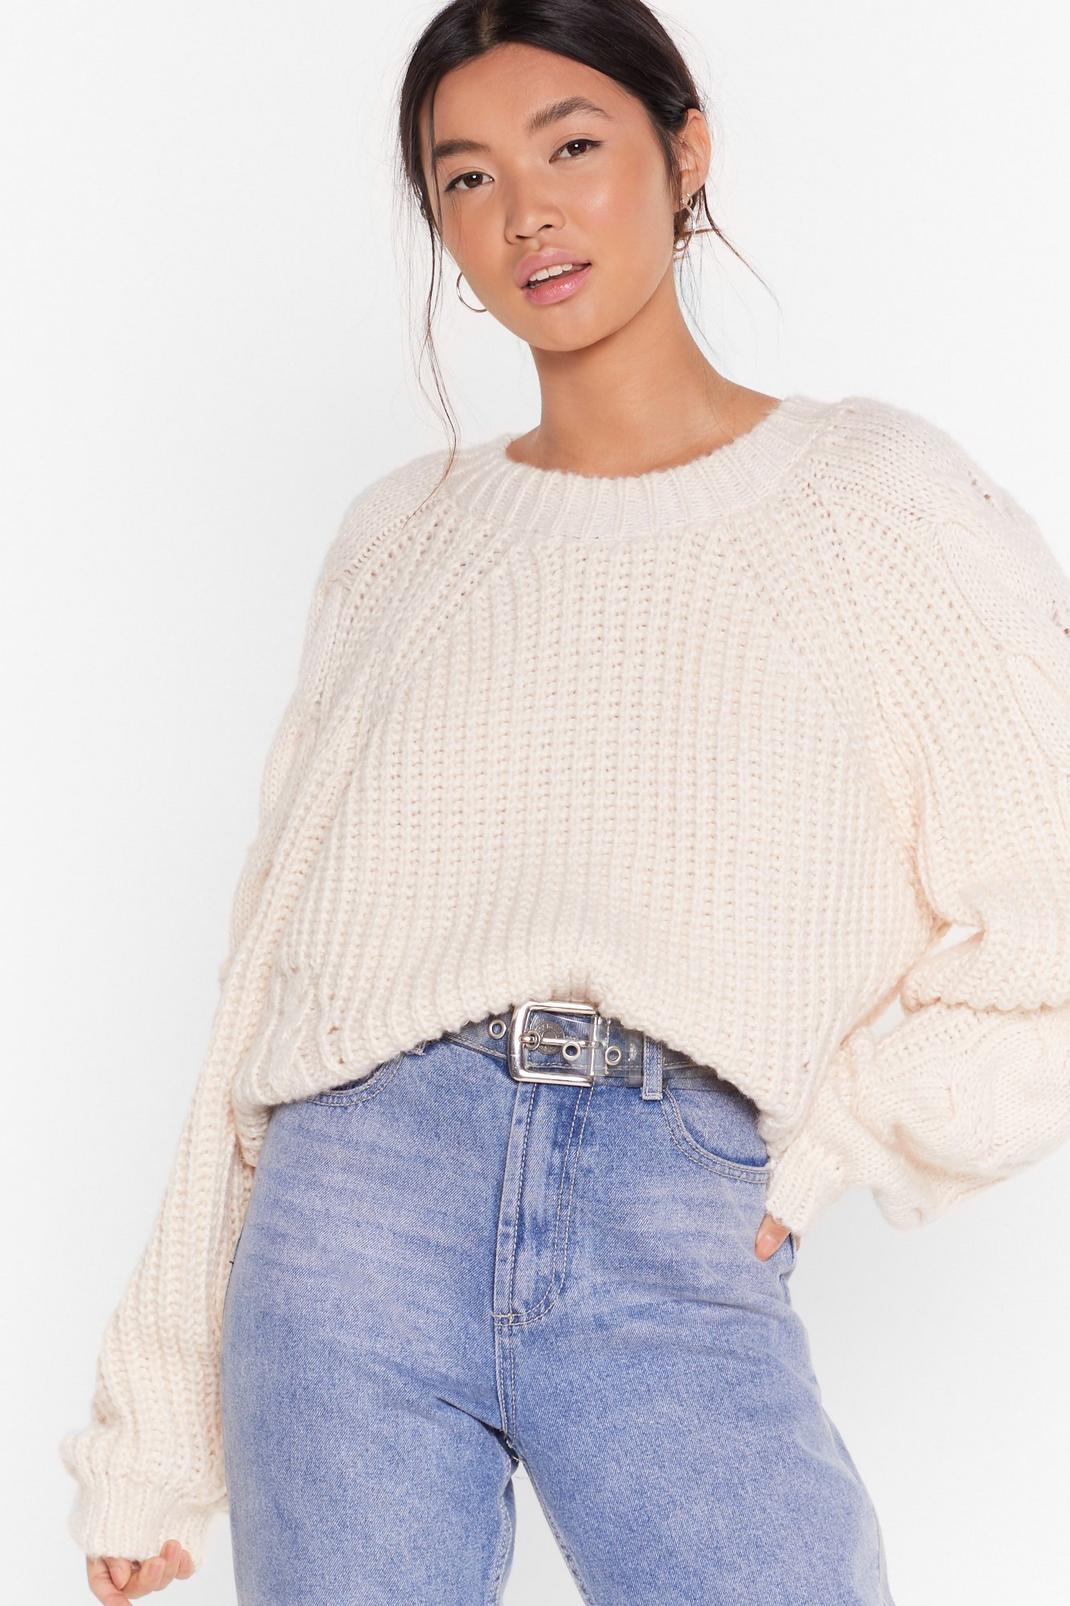 Knit or Miss Cable Knit Sweater image number 1